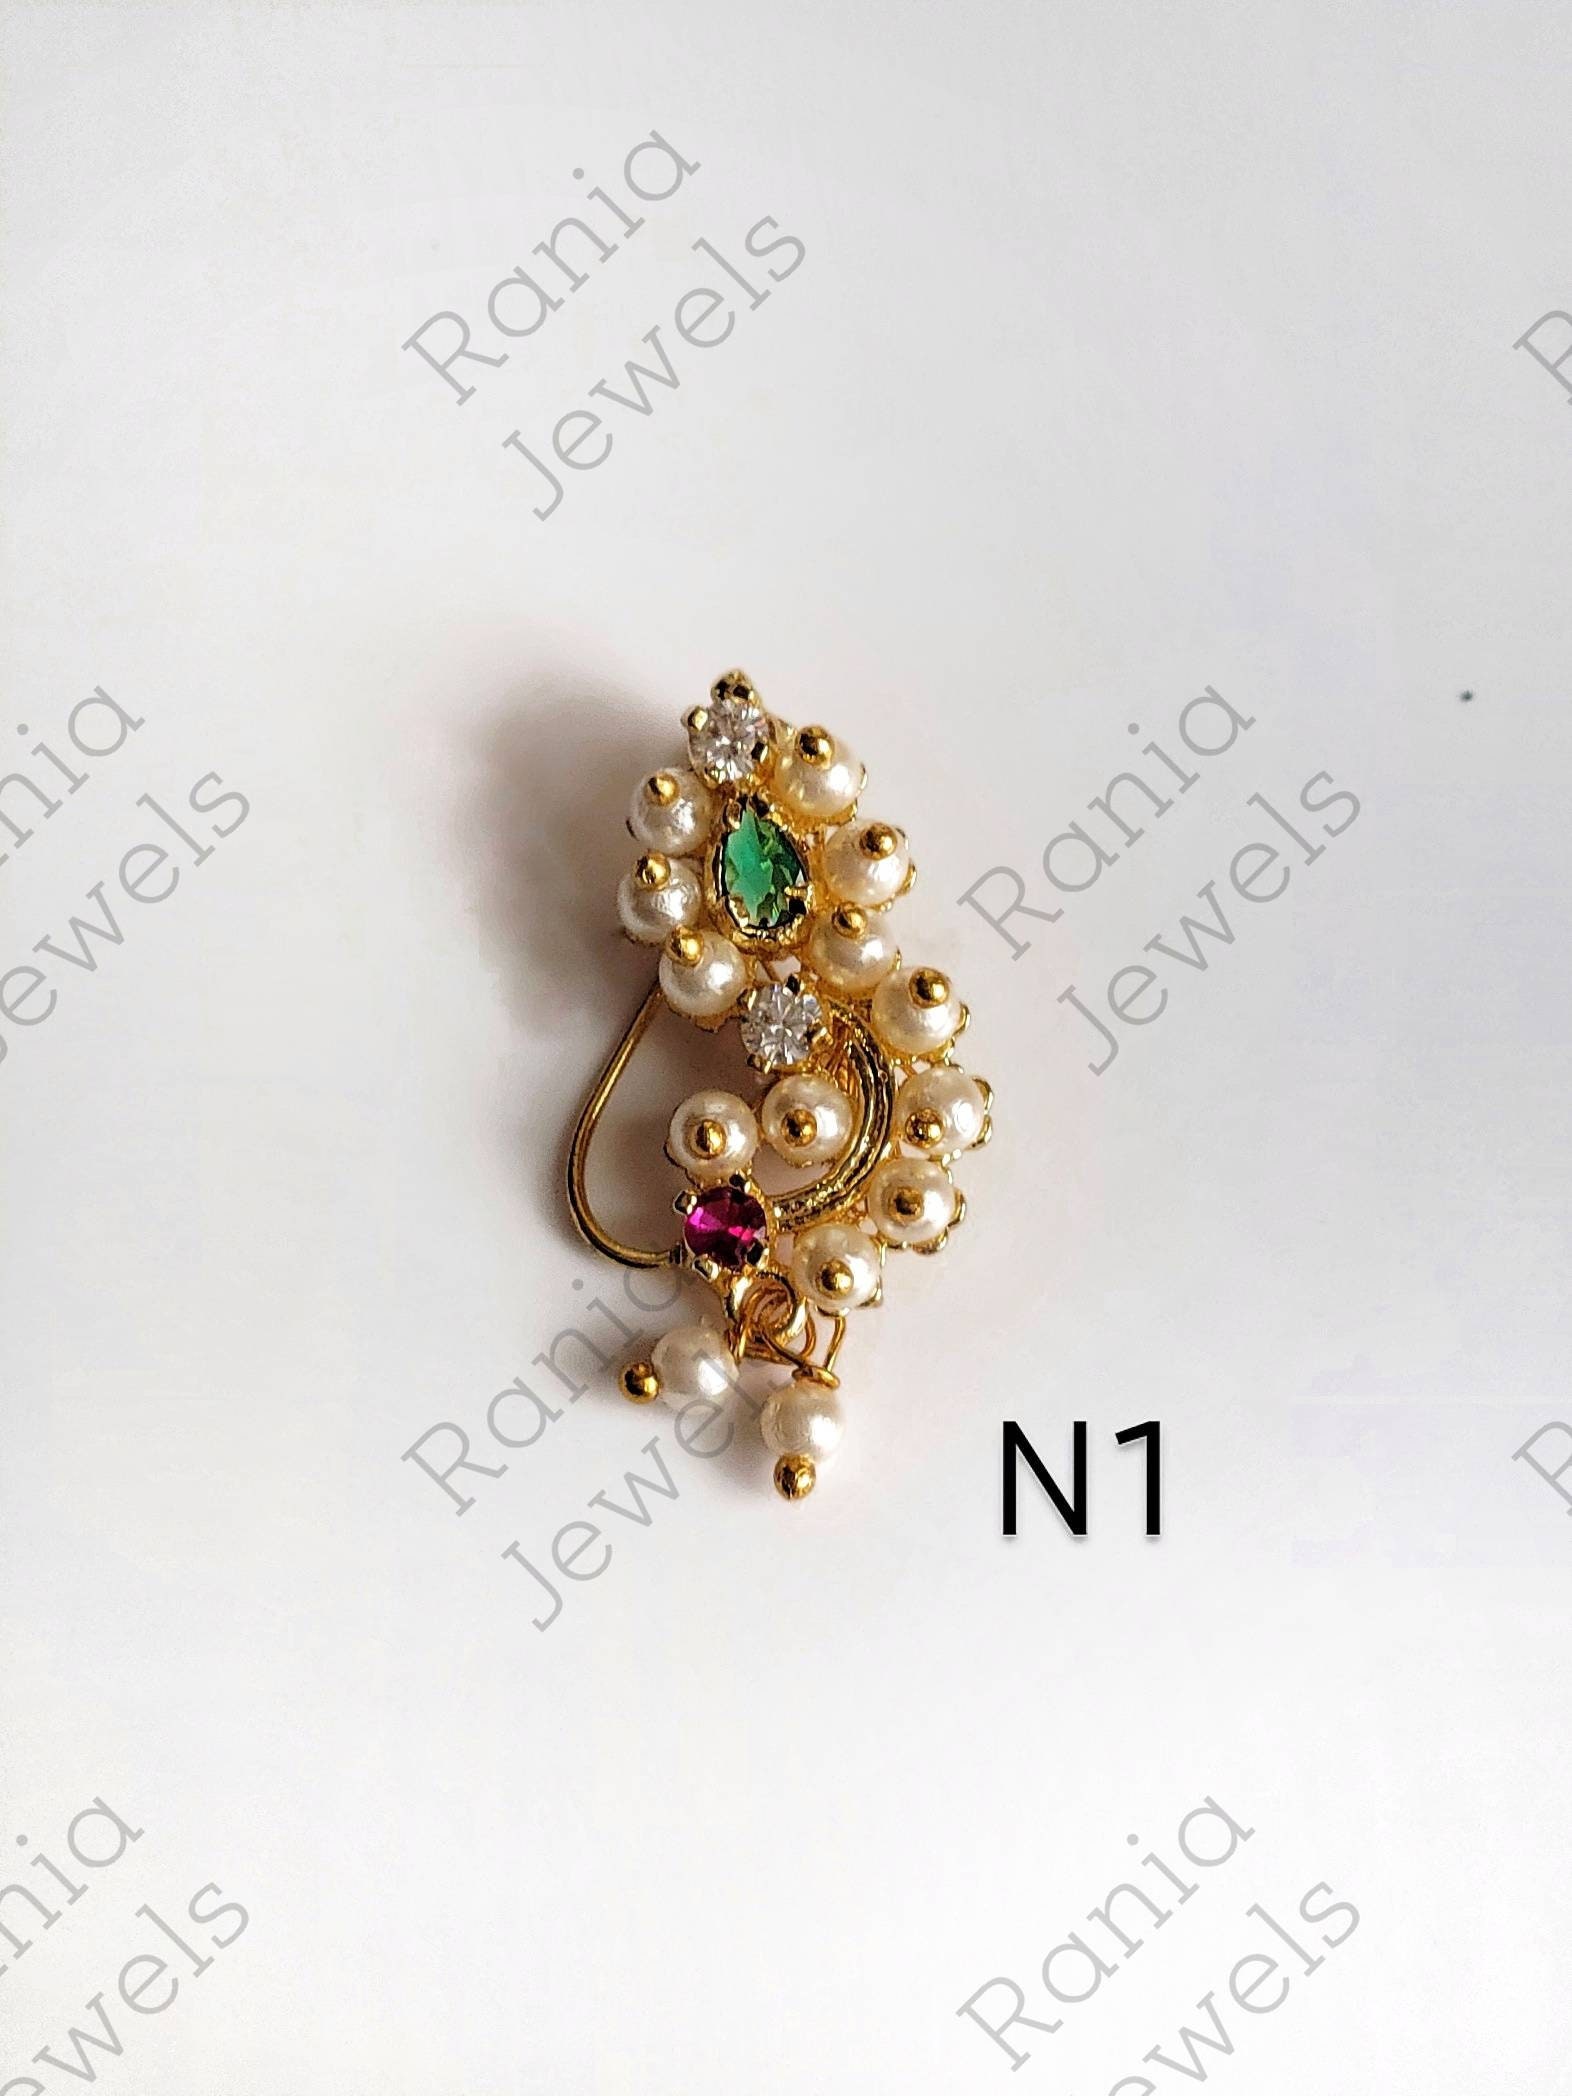 Buy PARNA Maharashtrian Jewellery Traditional Nath with Pearls and  Diamonds:A Timeless Piece of Marathi Nose Ring Jewelry For Women, Girls  (Taar/Pierced) at Amazon.in